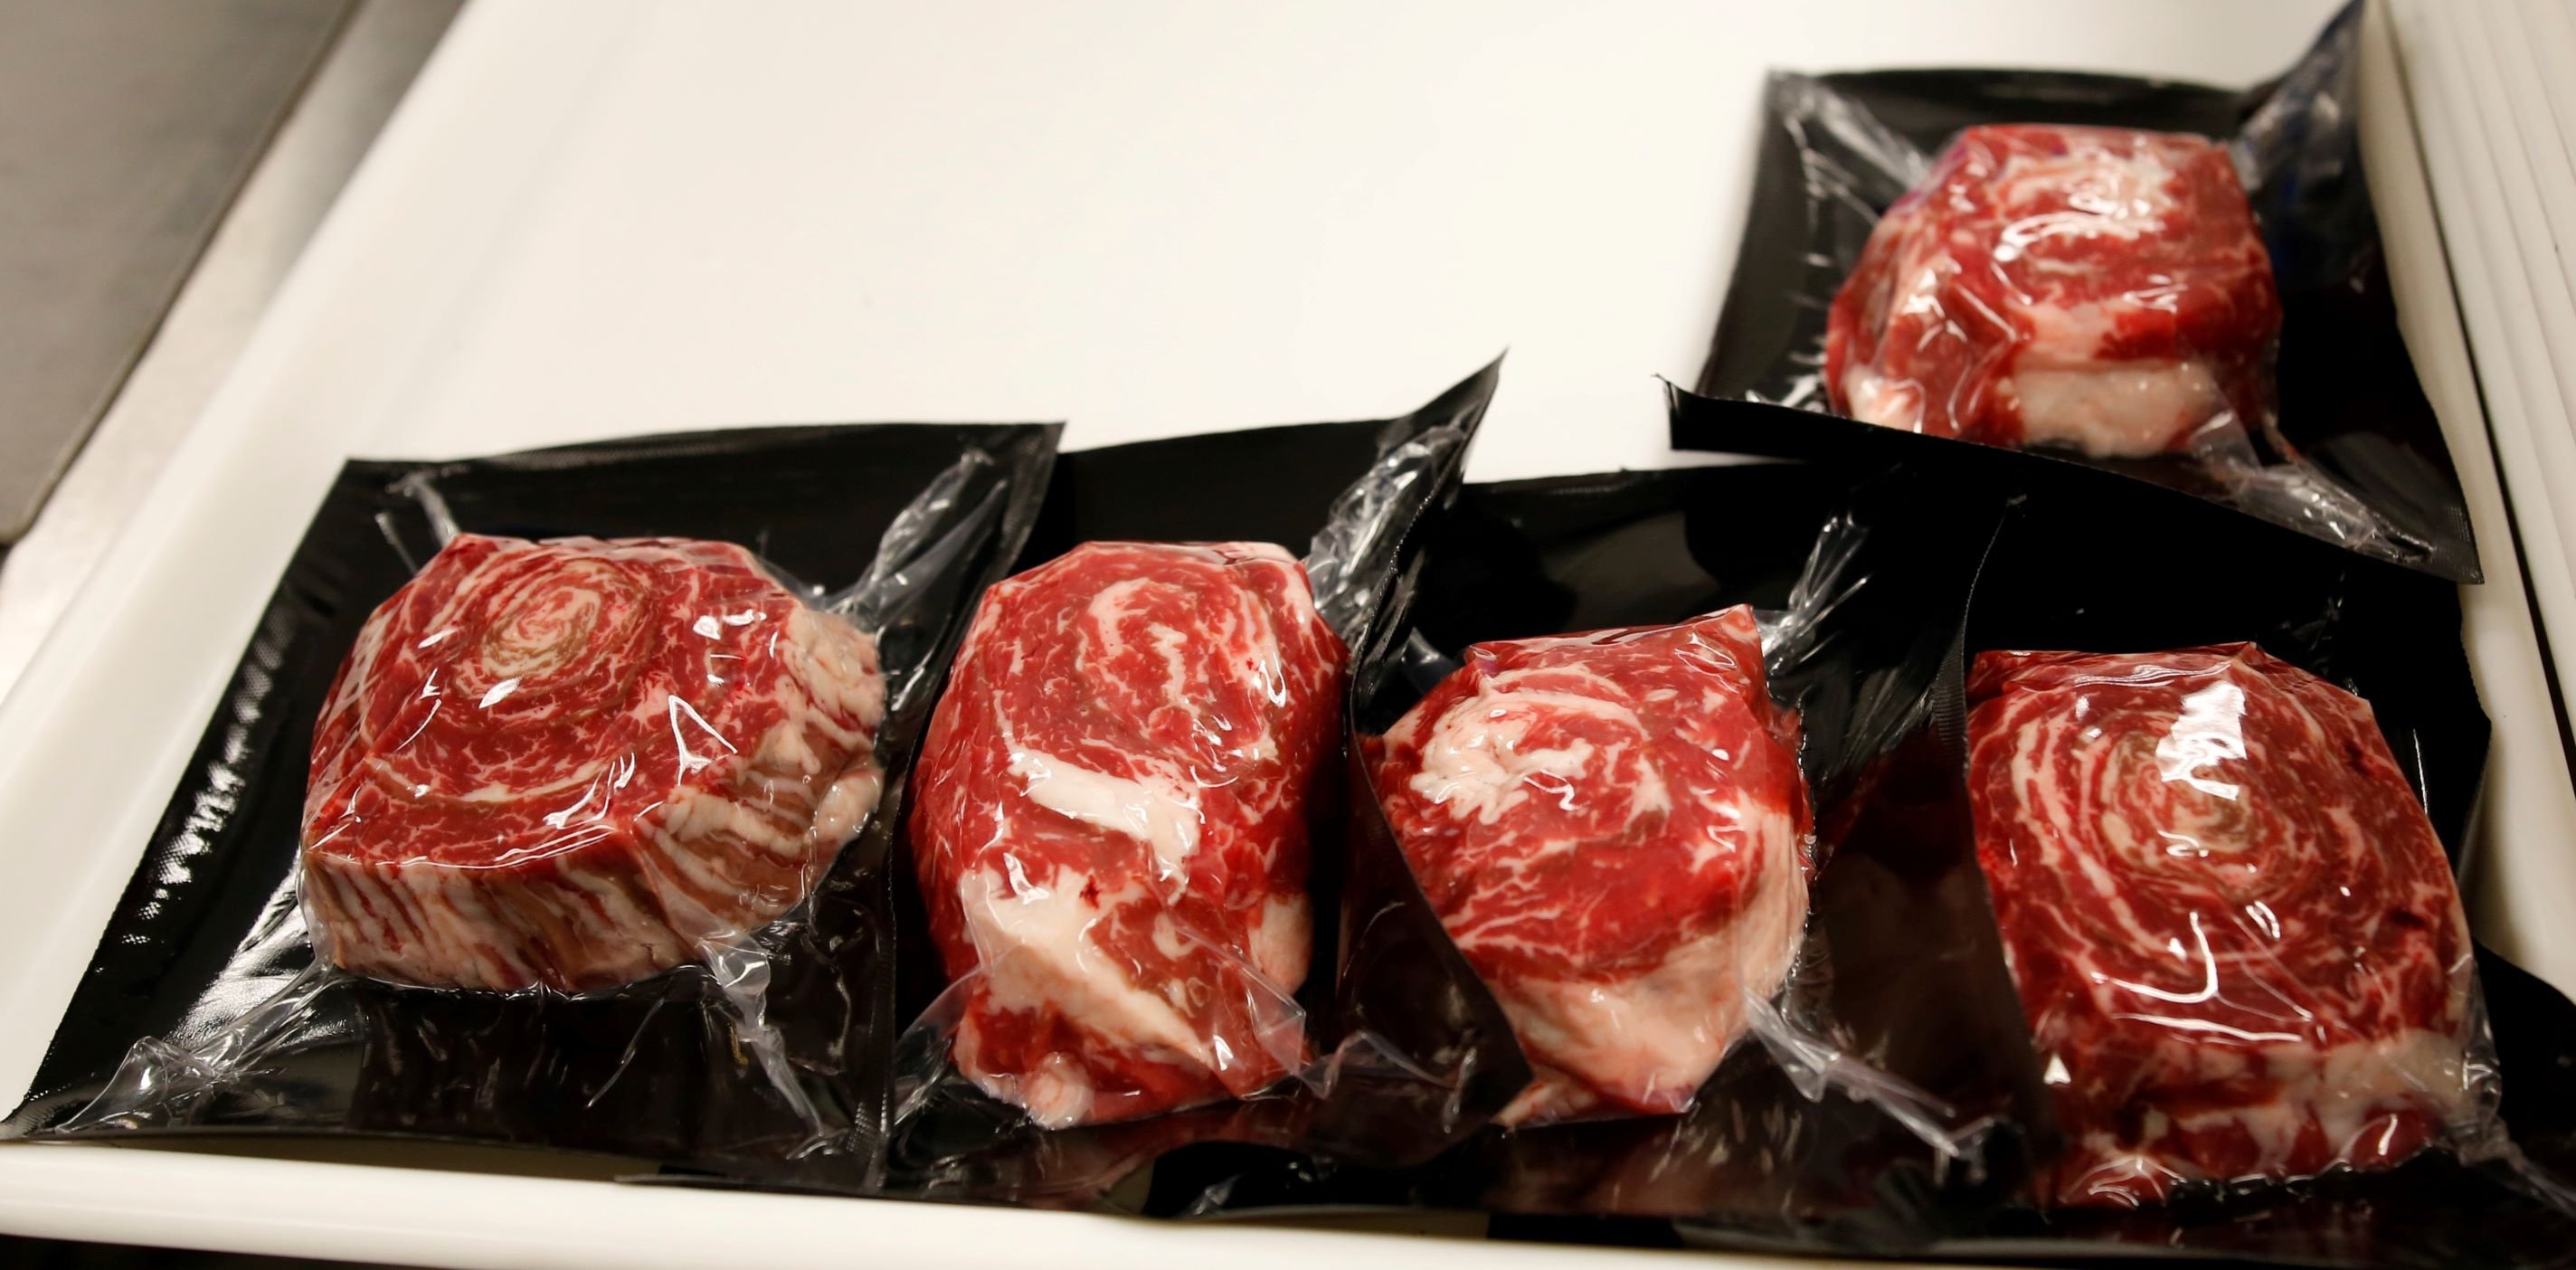 Tray of Packaged Steaks